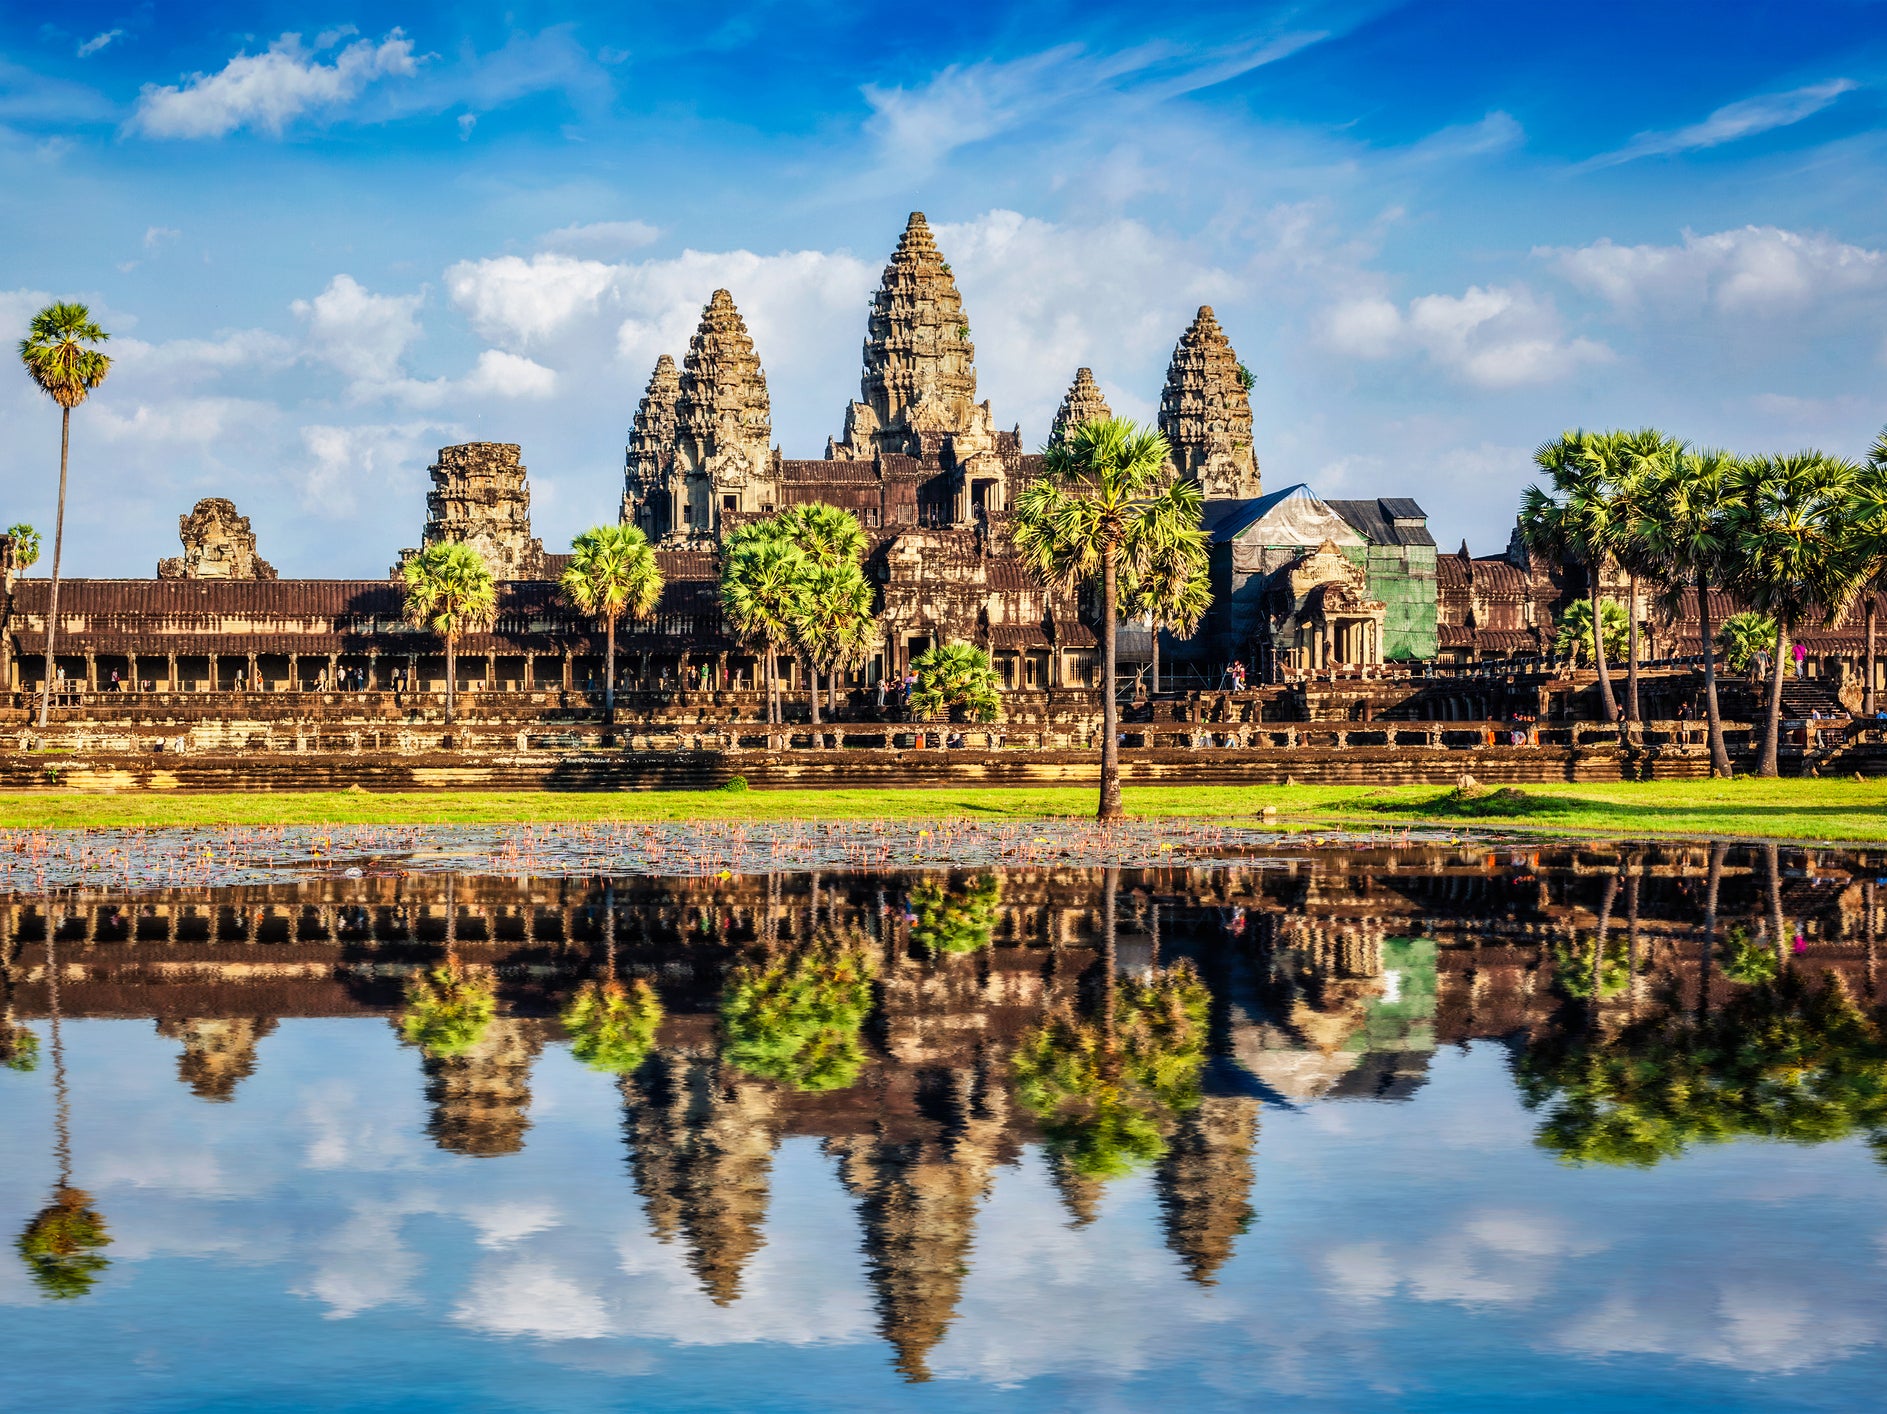 Angkor Wat, a Buddhist temple in Cambodia